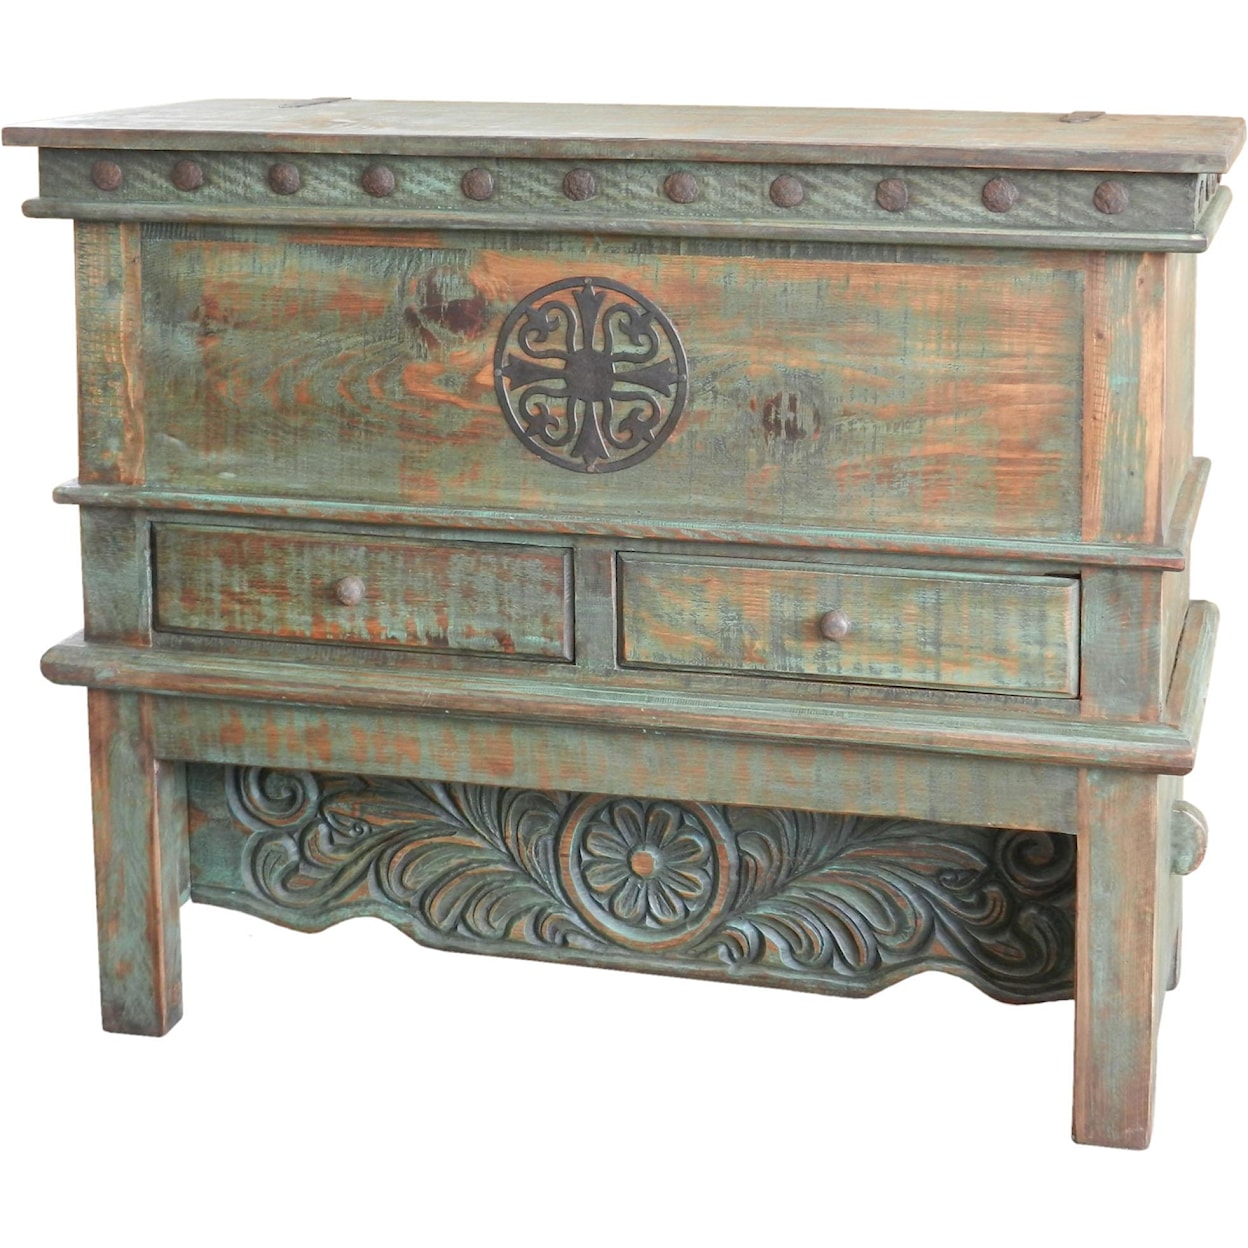 Furniture Source International Occasional Tables Alma Console